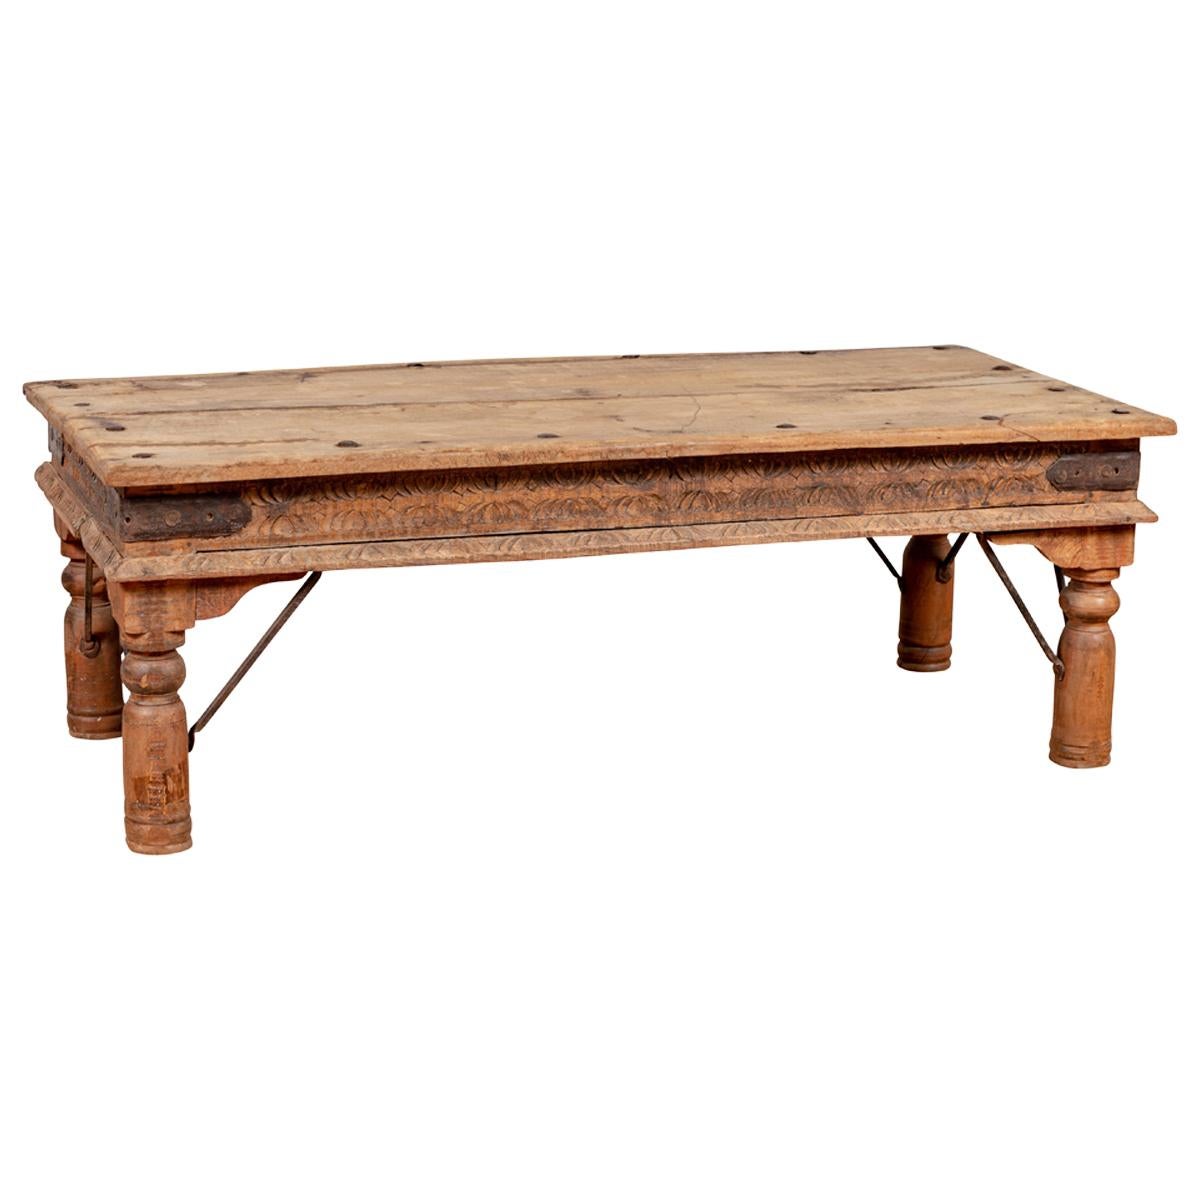 Rustic Indian Low Coffee Table with Carved Apron, Nailheads and Baluster Legs